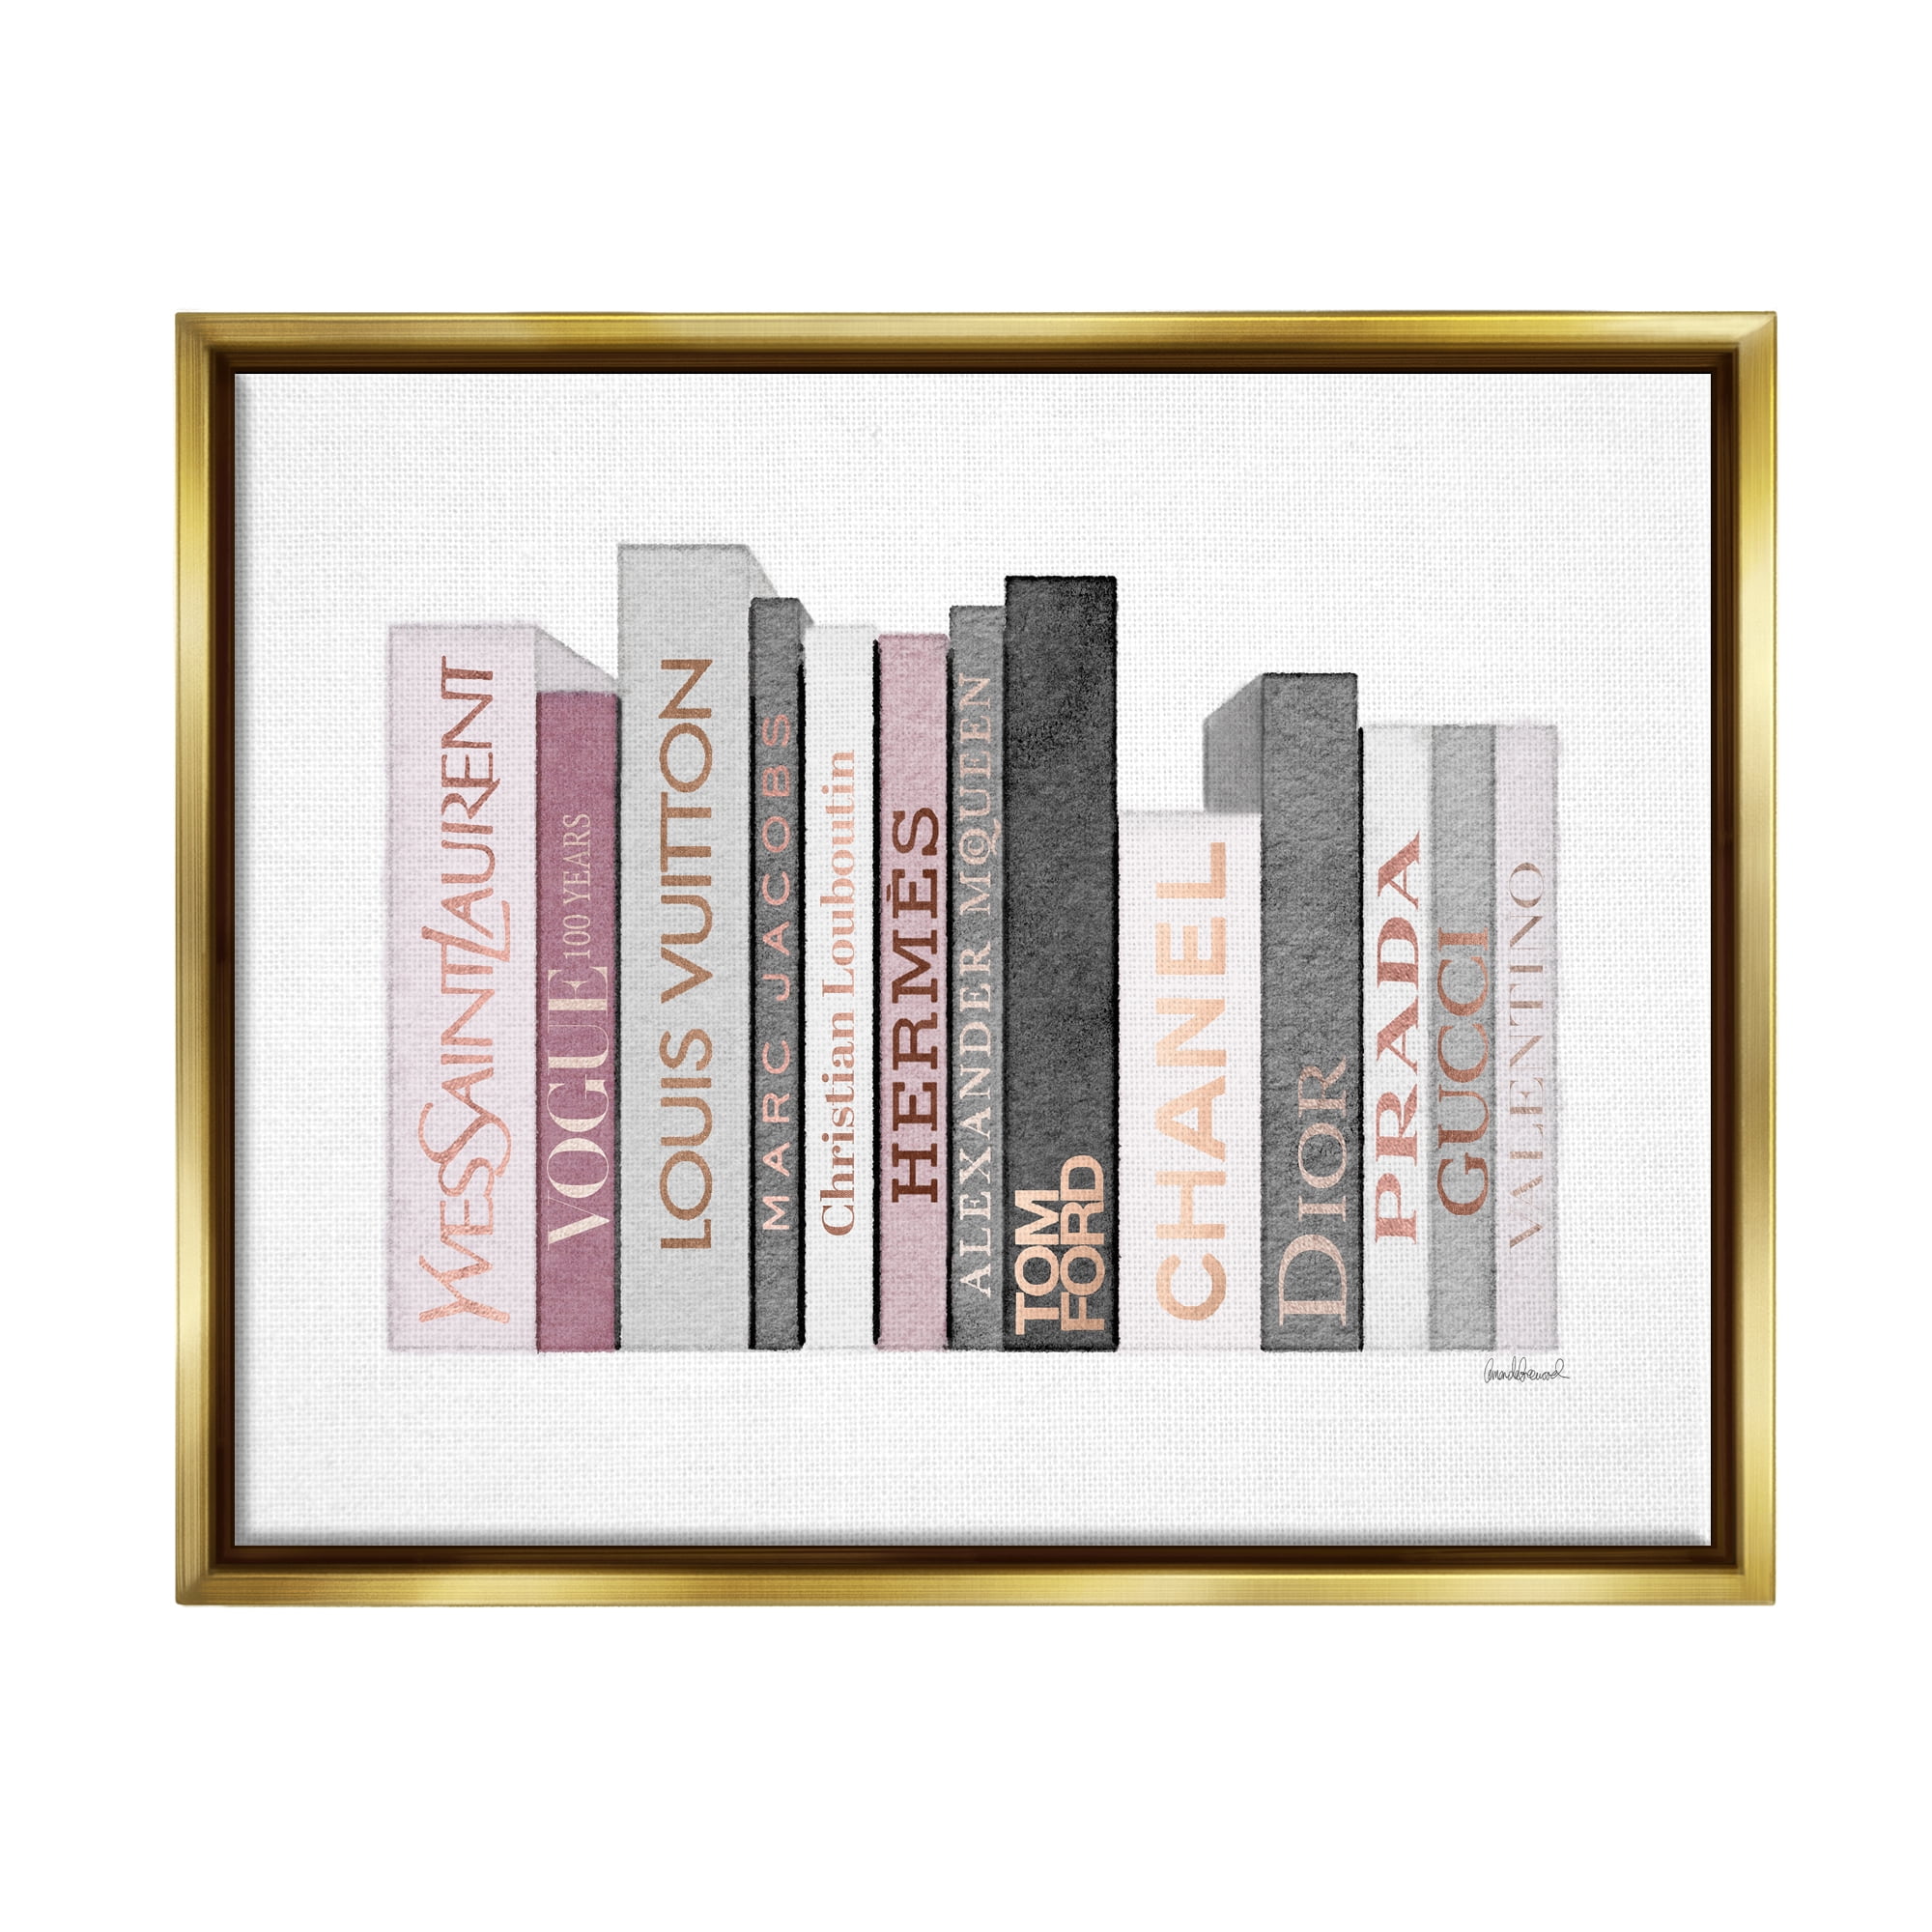 Stupell Industries Fashion Designer Bookstack Pink Grey Watercolor Metallic  Gold Framed Floating Canvas Wall Art, 16x20, by Amanda Greenwood